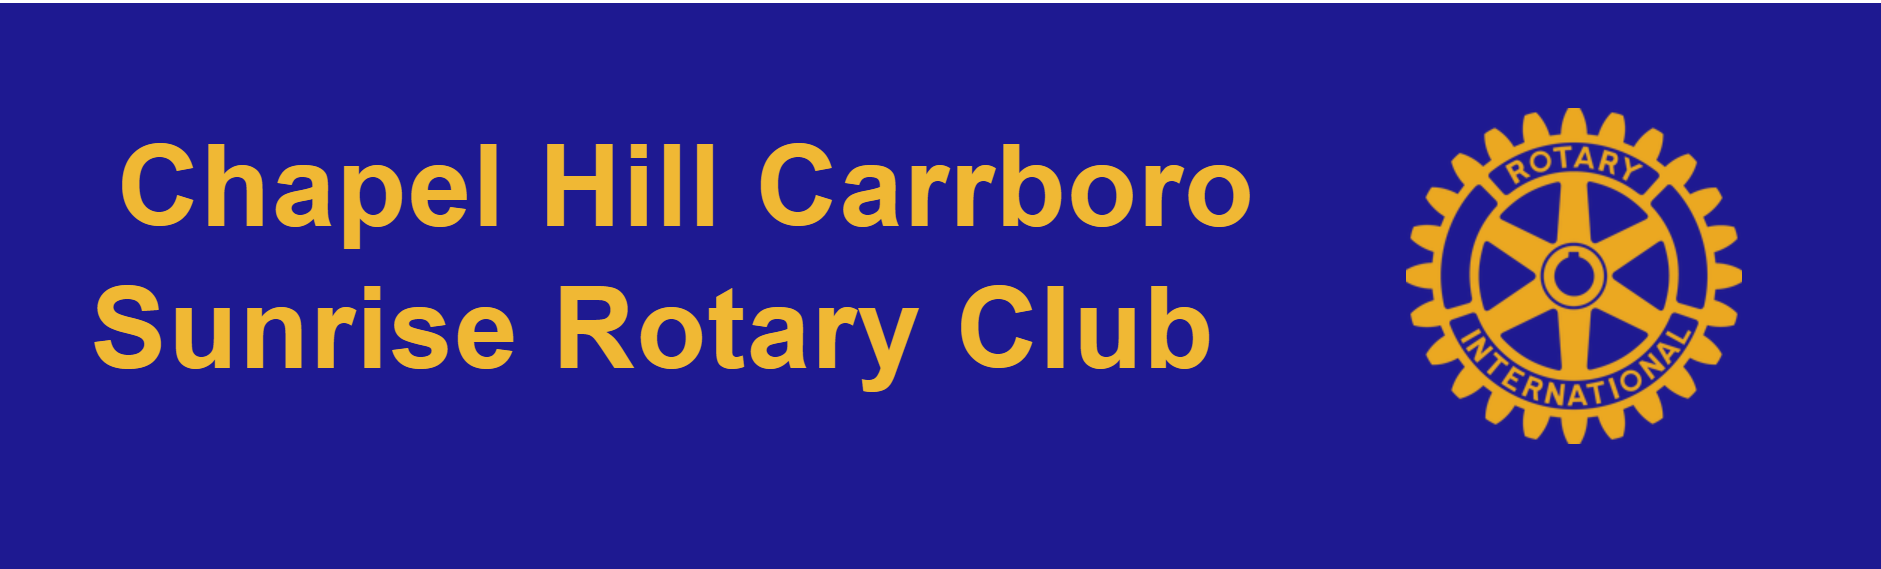 Logo for the Chapel Hill Carrboro Sunrise Rotary Club